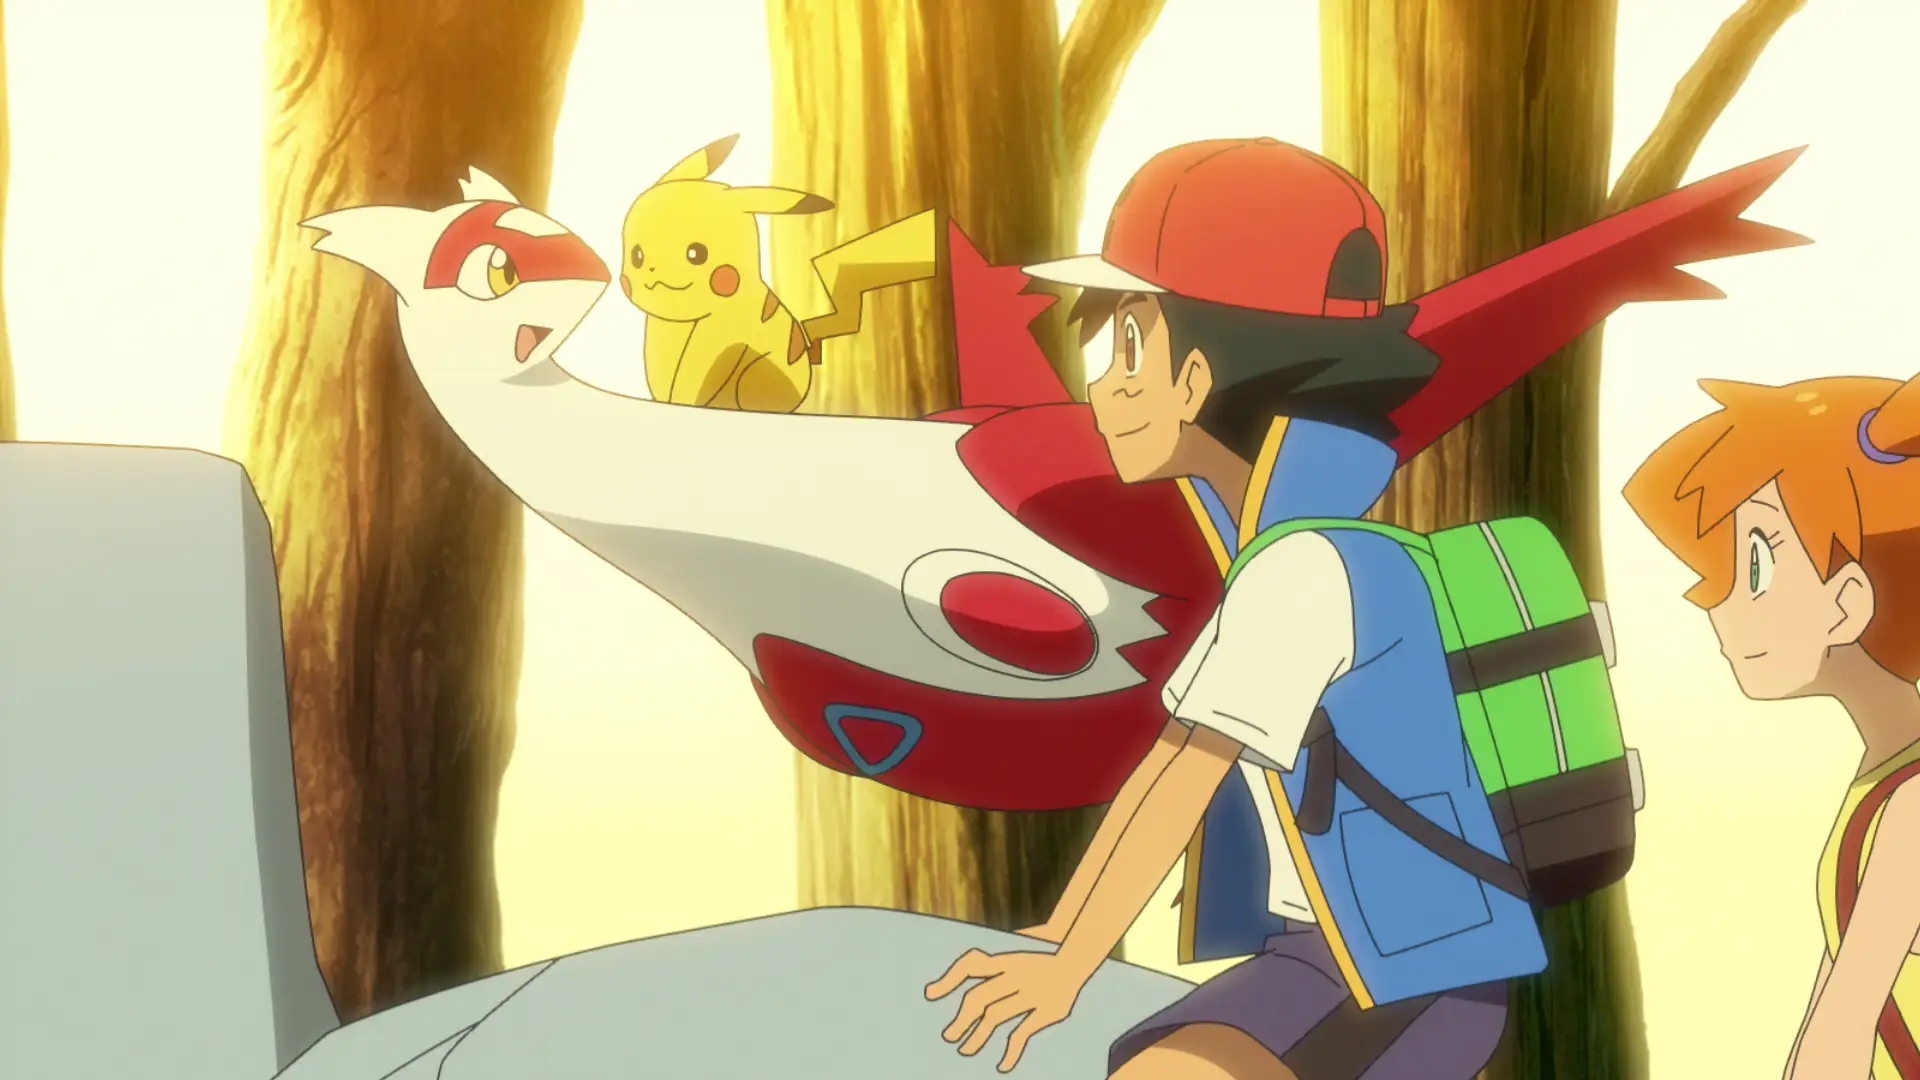 Latias together with Ash, Pikachu, and Misty